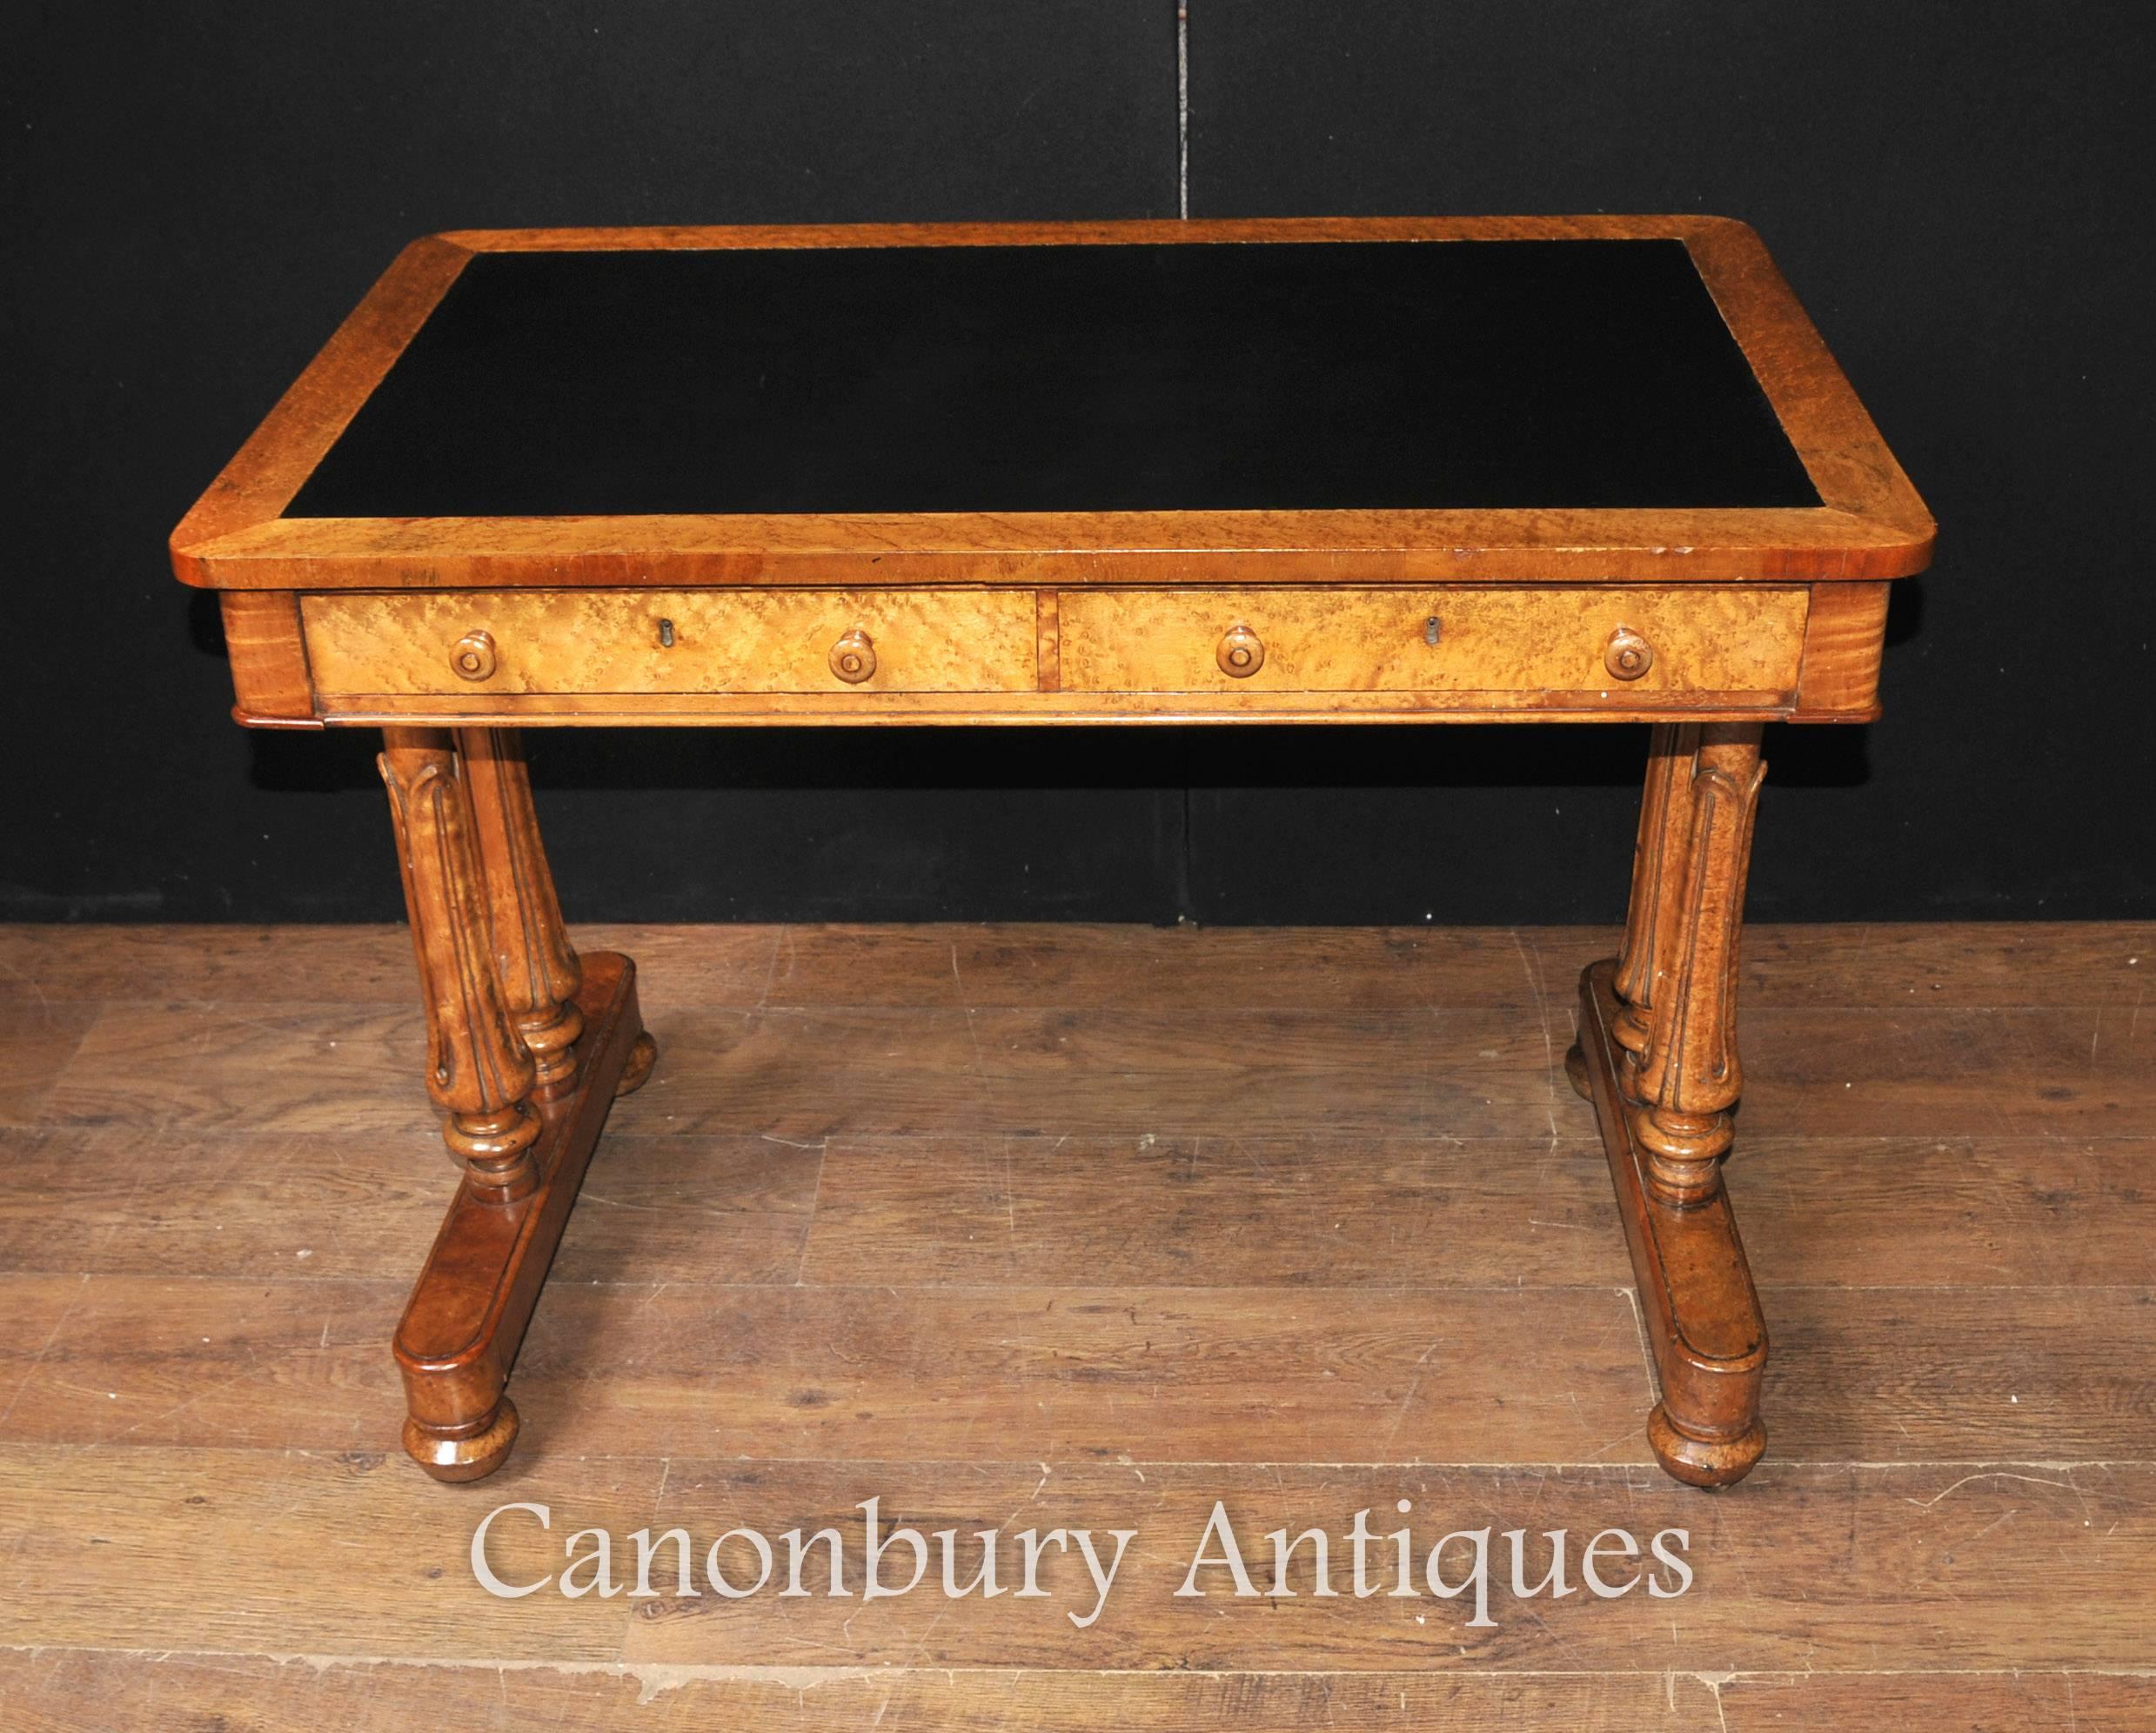 Stunning antique Regency desk or writing table in maple wood.
We date this to, circa 1830 and it really is a fine specimen.
Very elegant, just look at those tulip legs.
Two drawers to the front so ample storage.
Purchased from a dealer on